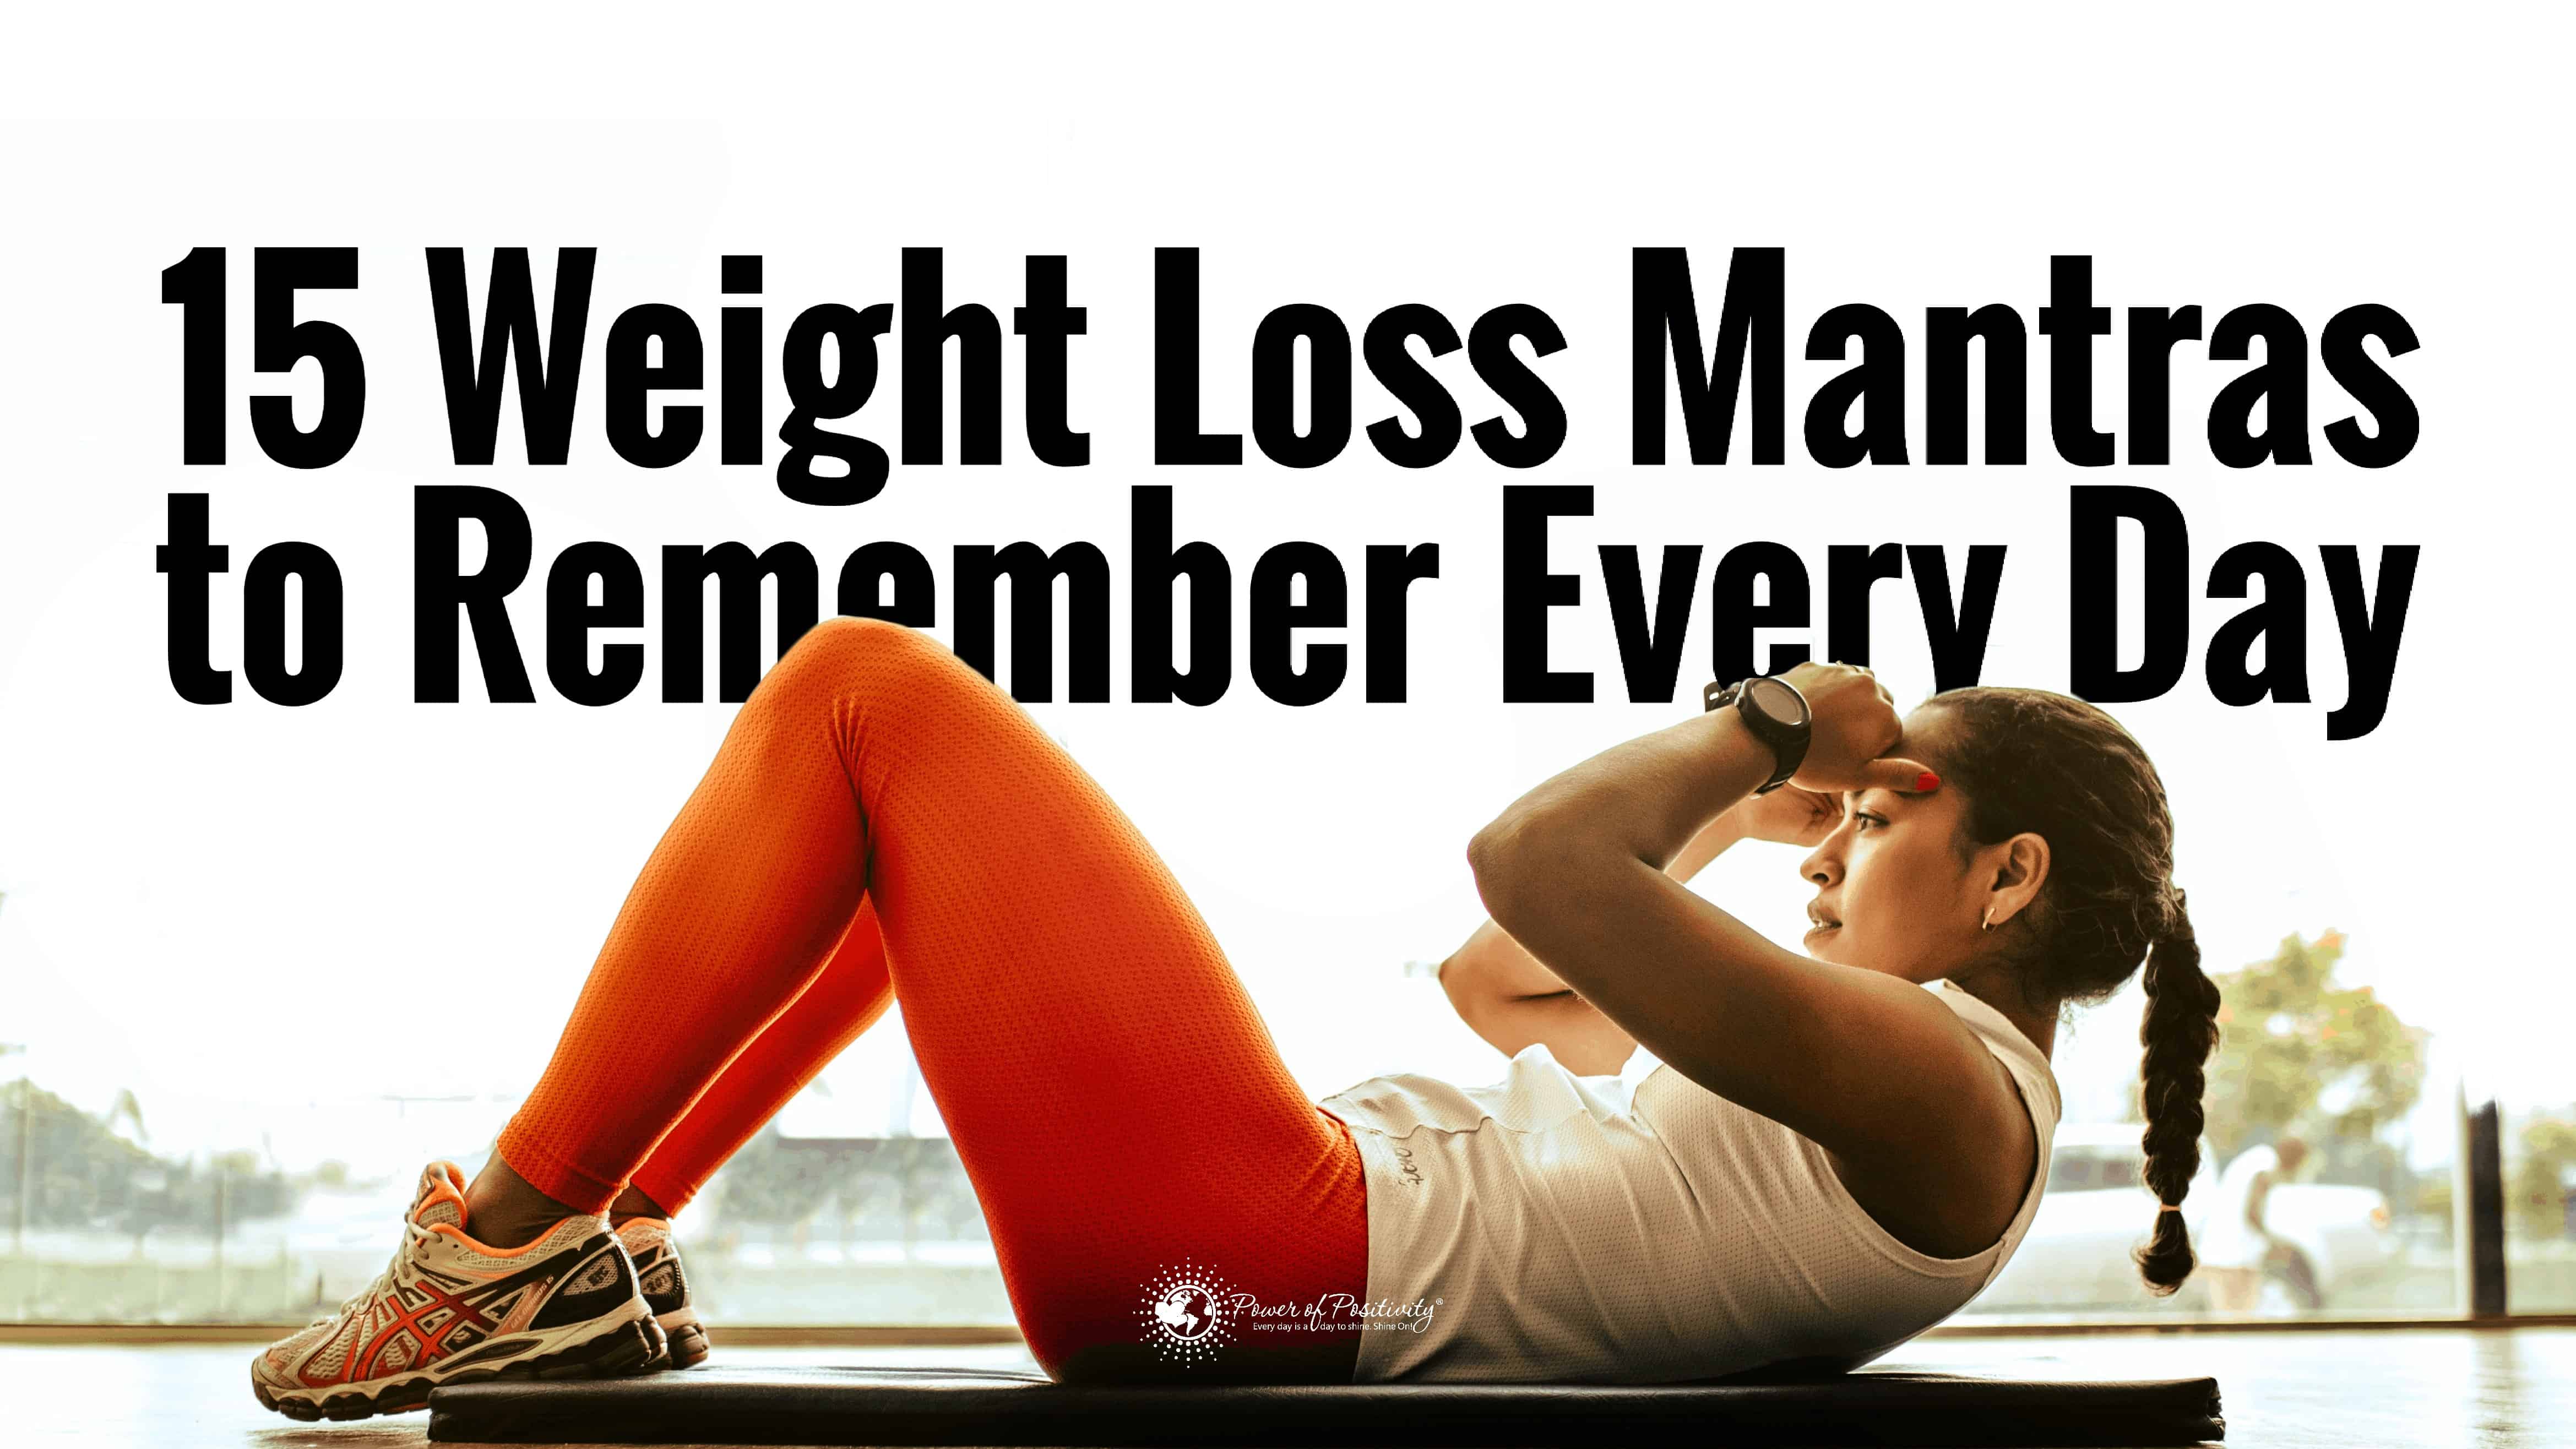 15 Weight Loss Mantras to Remember Every Day